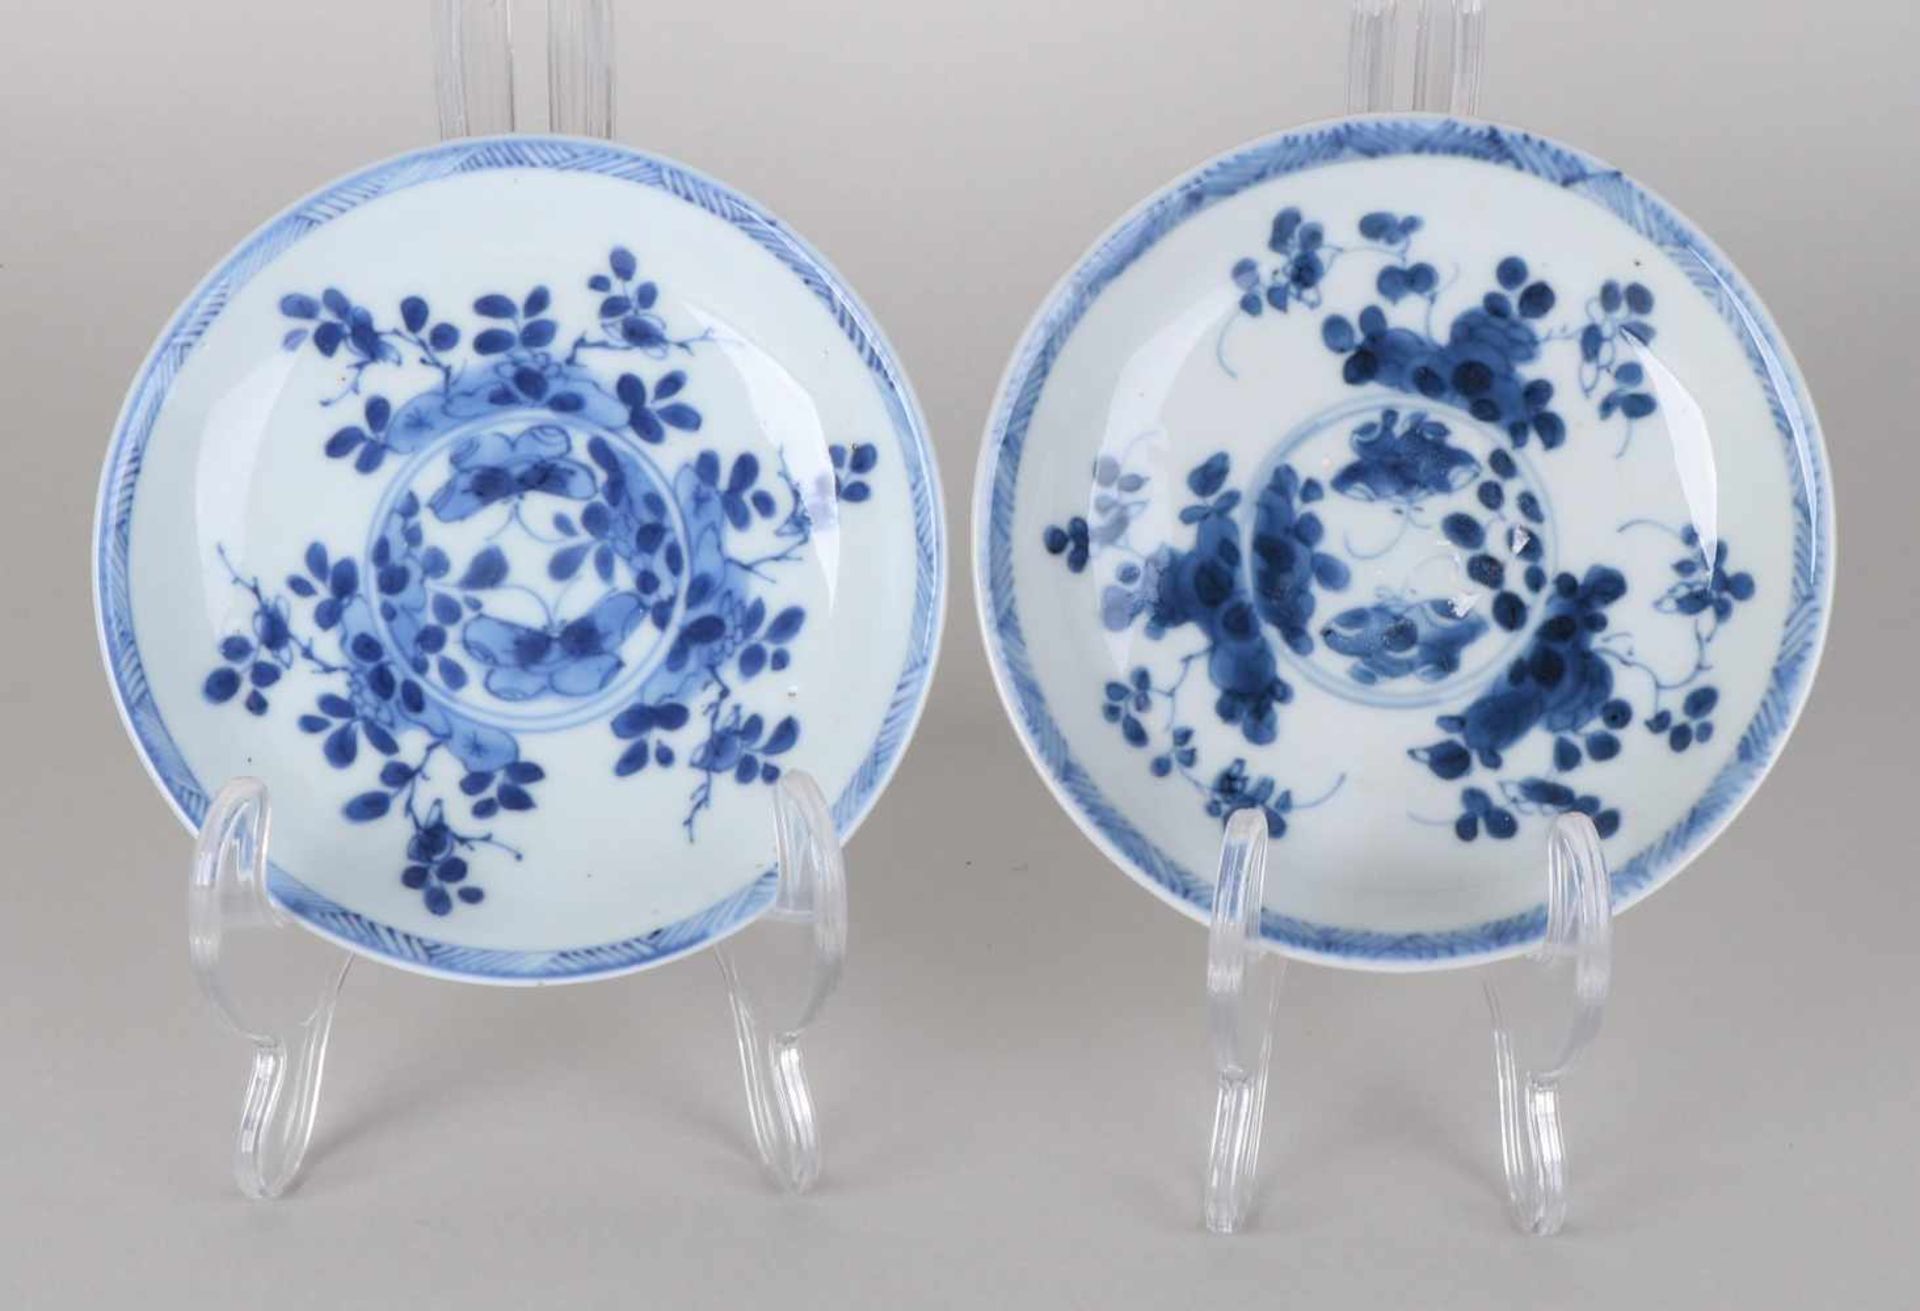 Two 18th - 19th century Chinese porcelain capuchin dishes with floral decor. Dimensions: ø 11.2